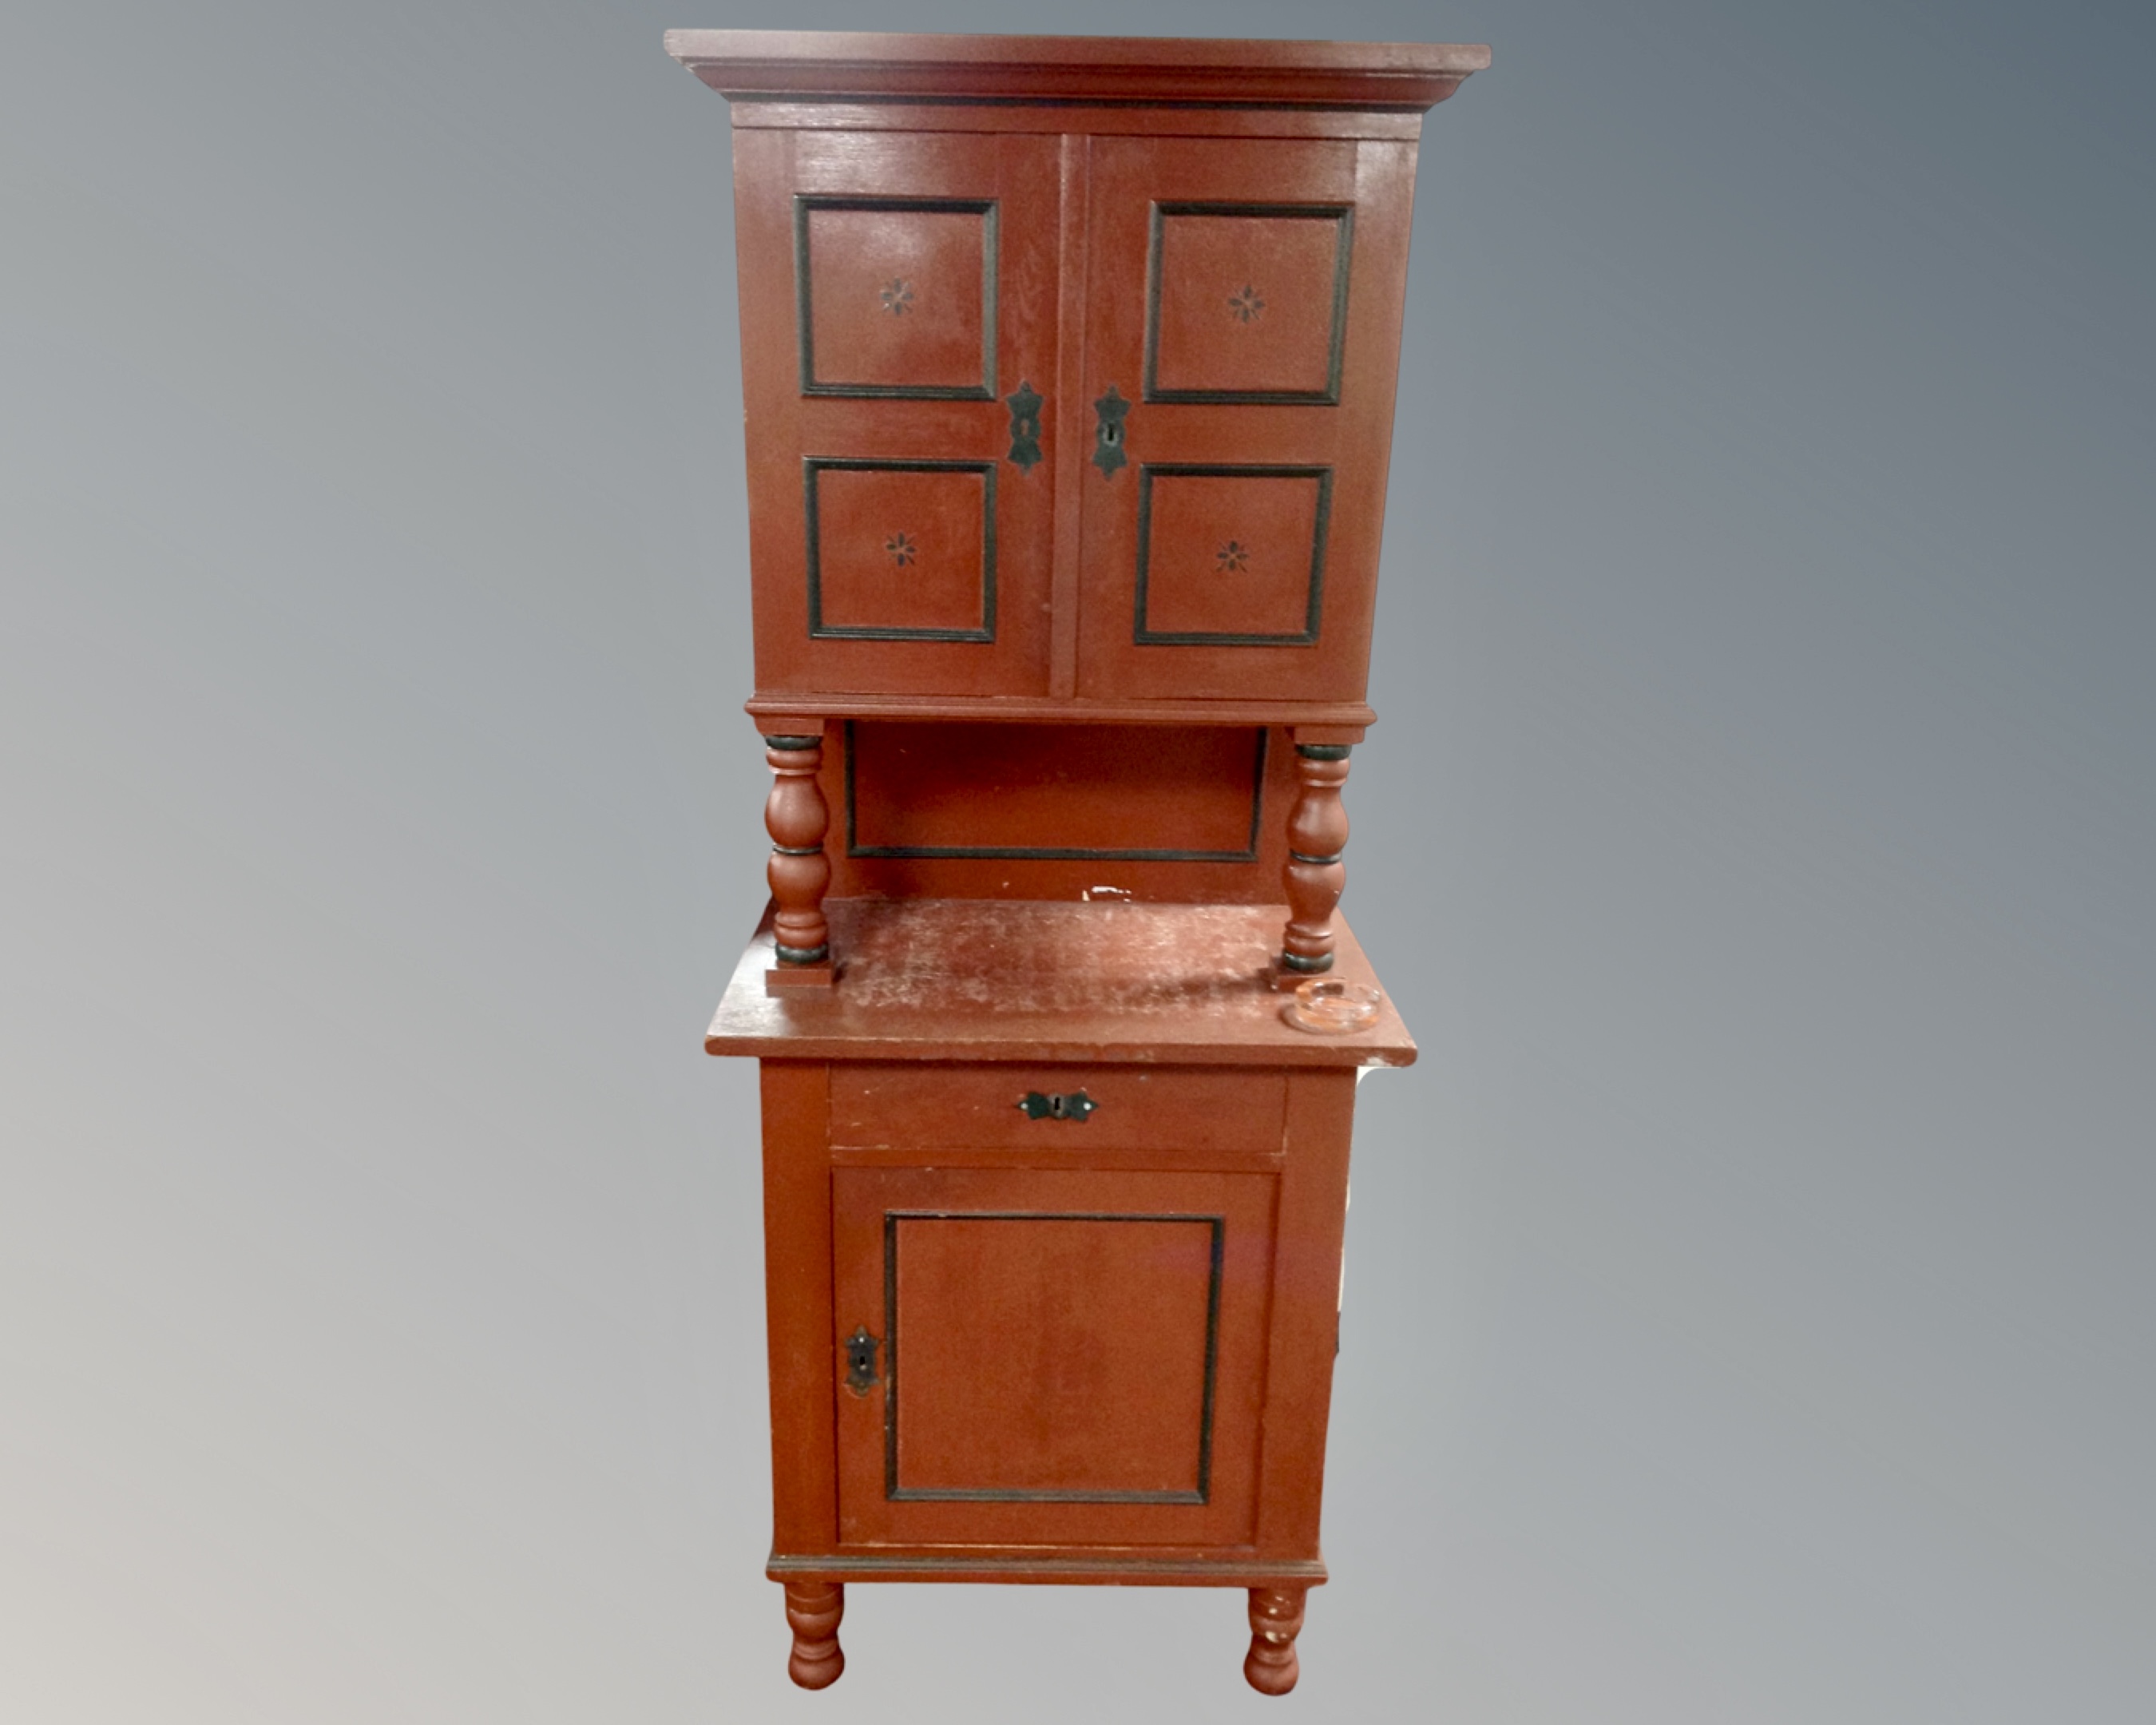 A painted continental pine cupboard on raised legs fitted with a drawer and double door cupboard